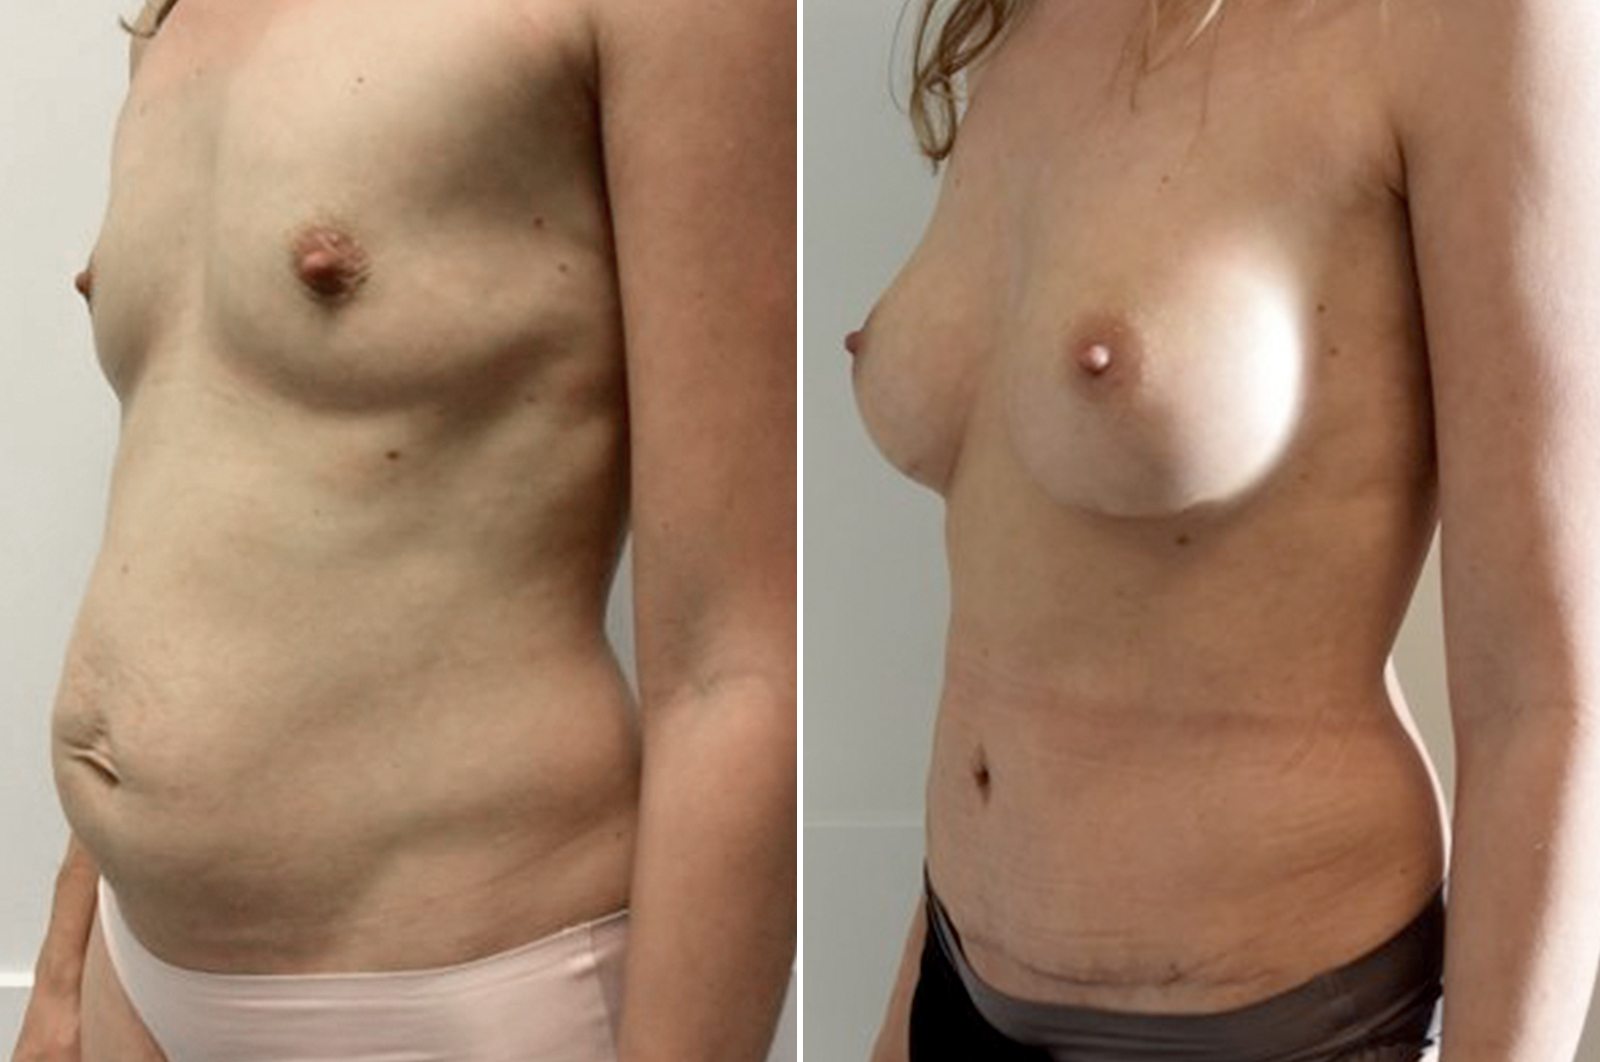 Body surgery abdominoplasty tummy tuck before and after surgery in antwerp